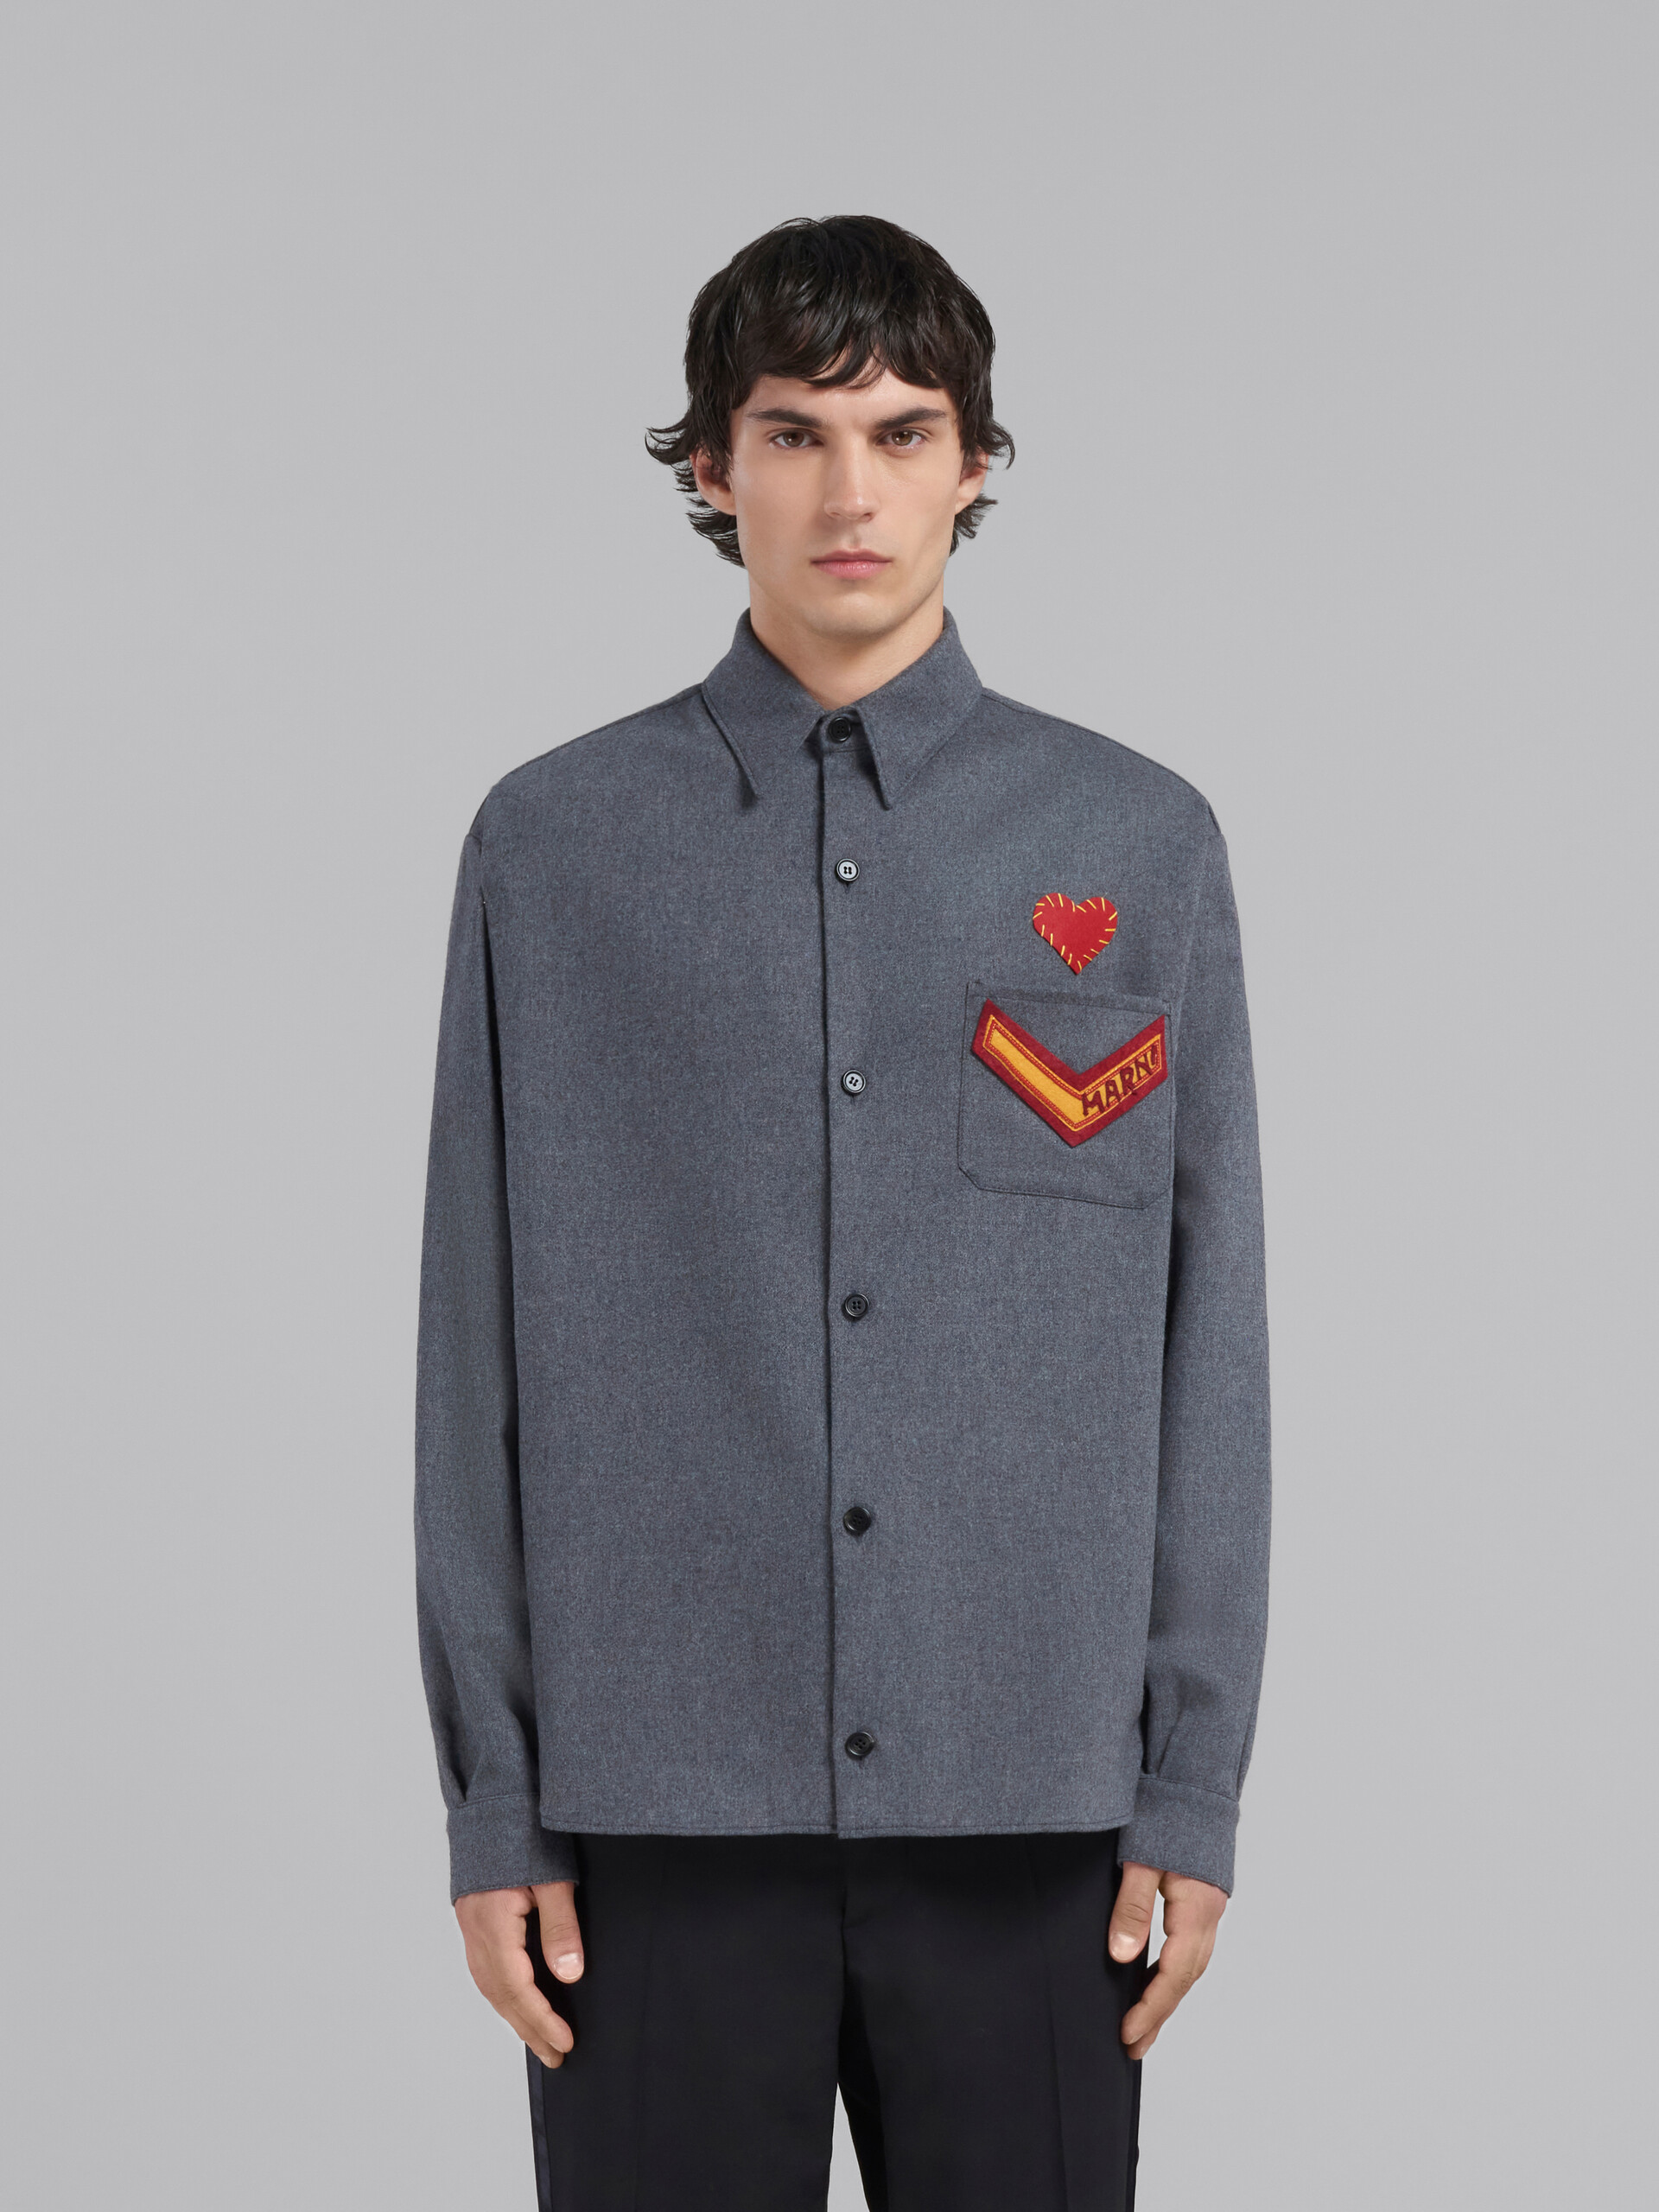 Grey flannel shirt with patches - Shirts - Image 2